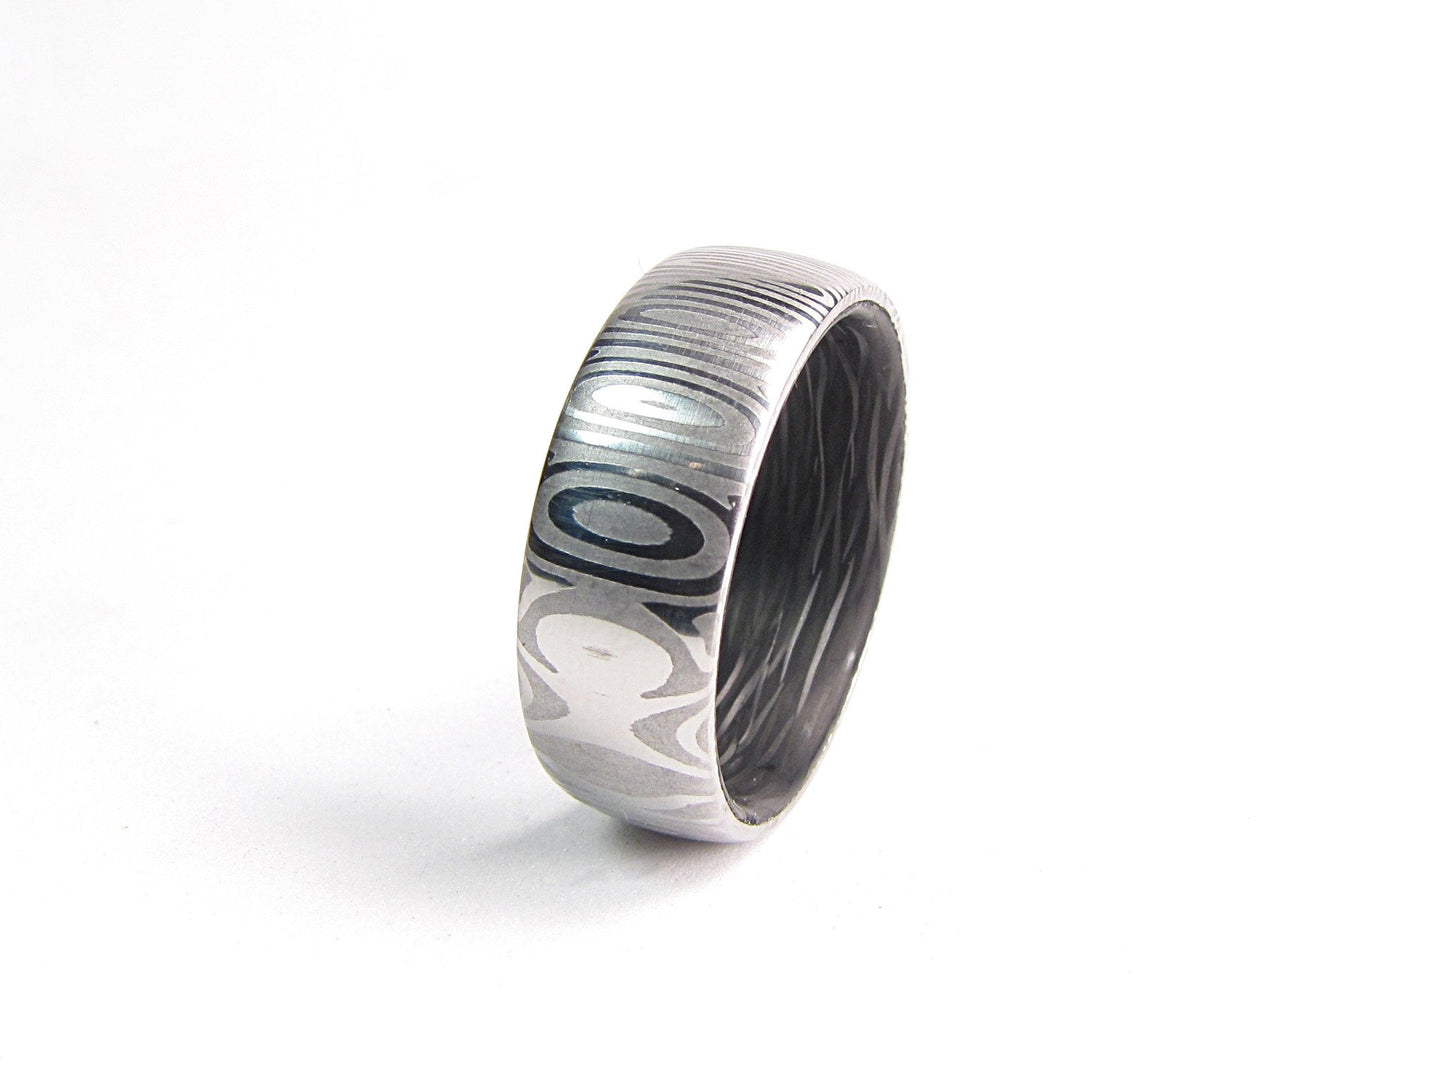 Eclipse - Damascus Steel and Carbon Fiber Men's Ring